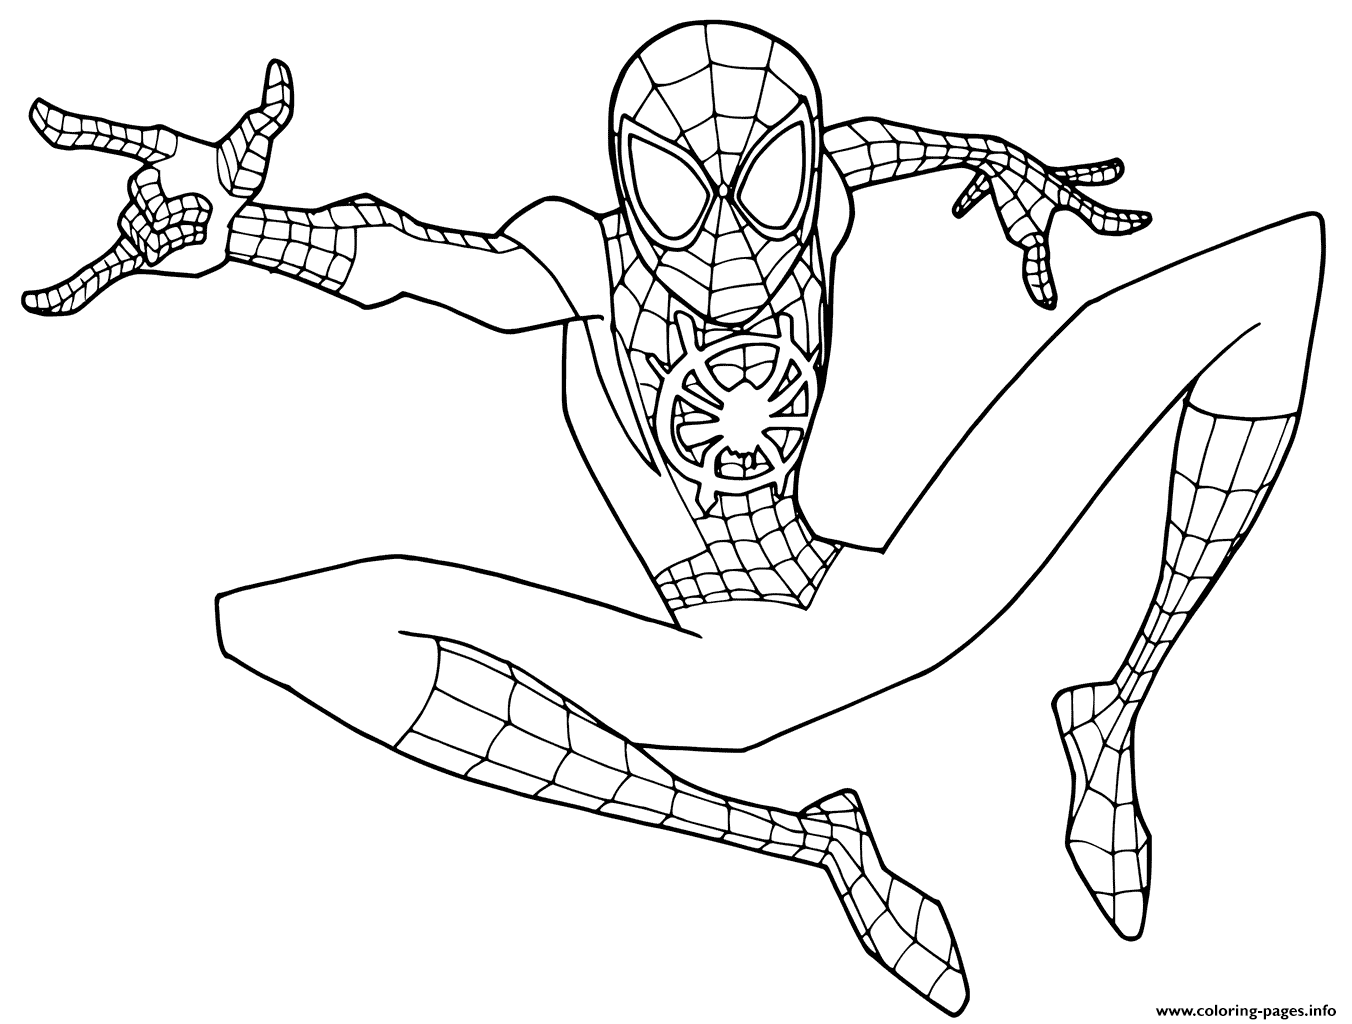 Young Spider Man coloring